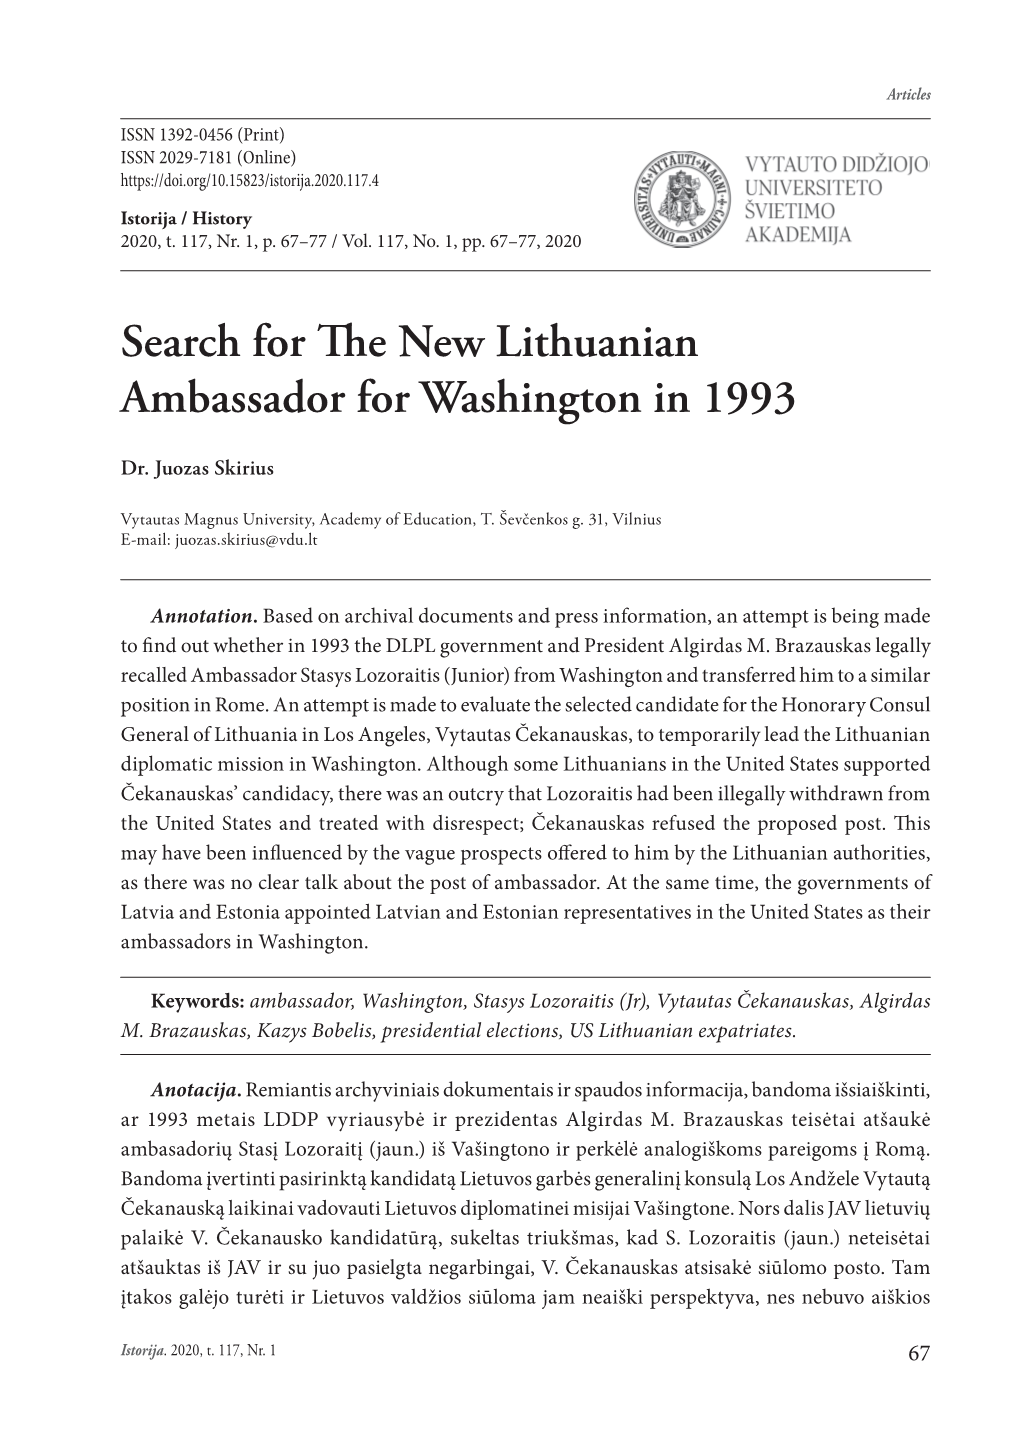 Search for the New Lithuanian Ambassador for Washington in 1993